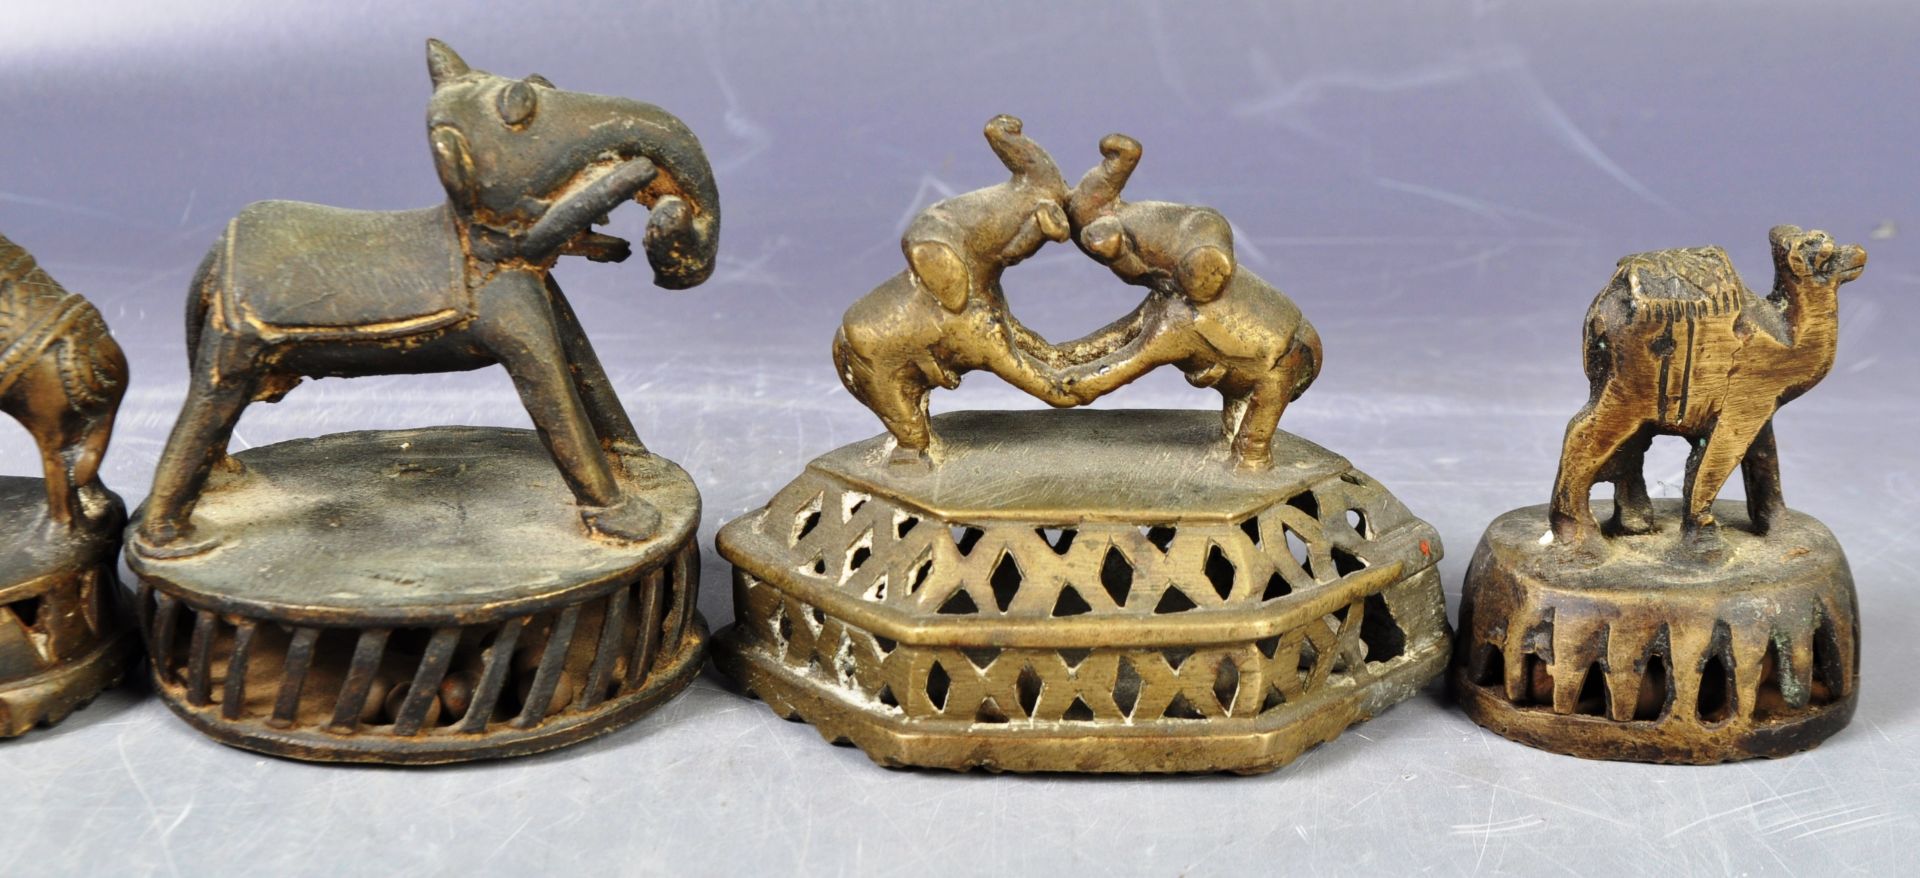 COLLECTION OF SIX INDIAN ANTIQUE FOOT SCRAPERS / SCRUBBERS - Image 6 of 9